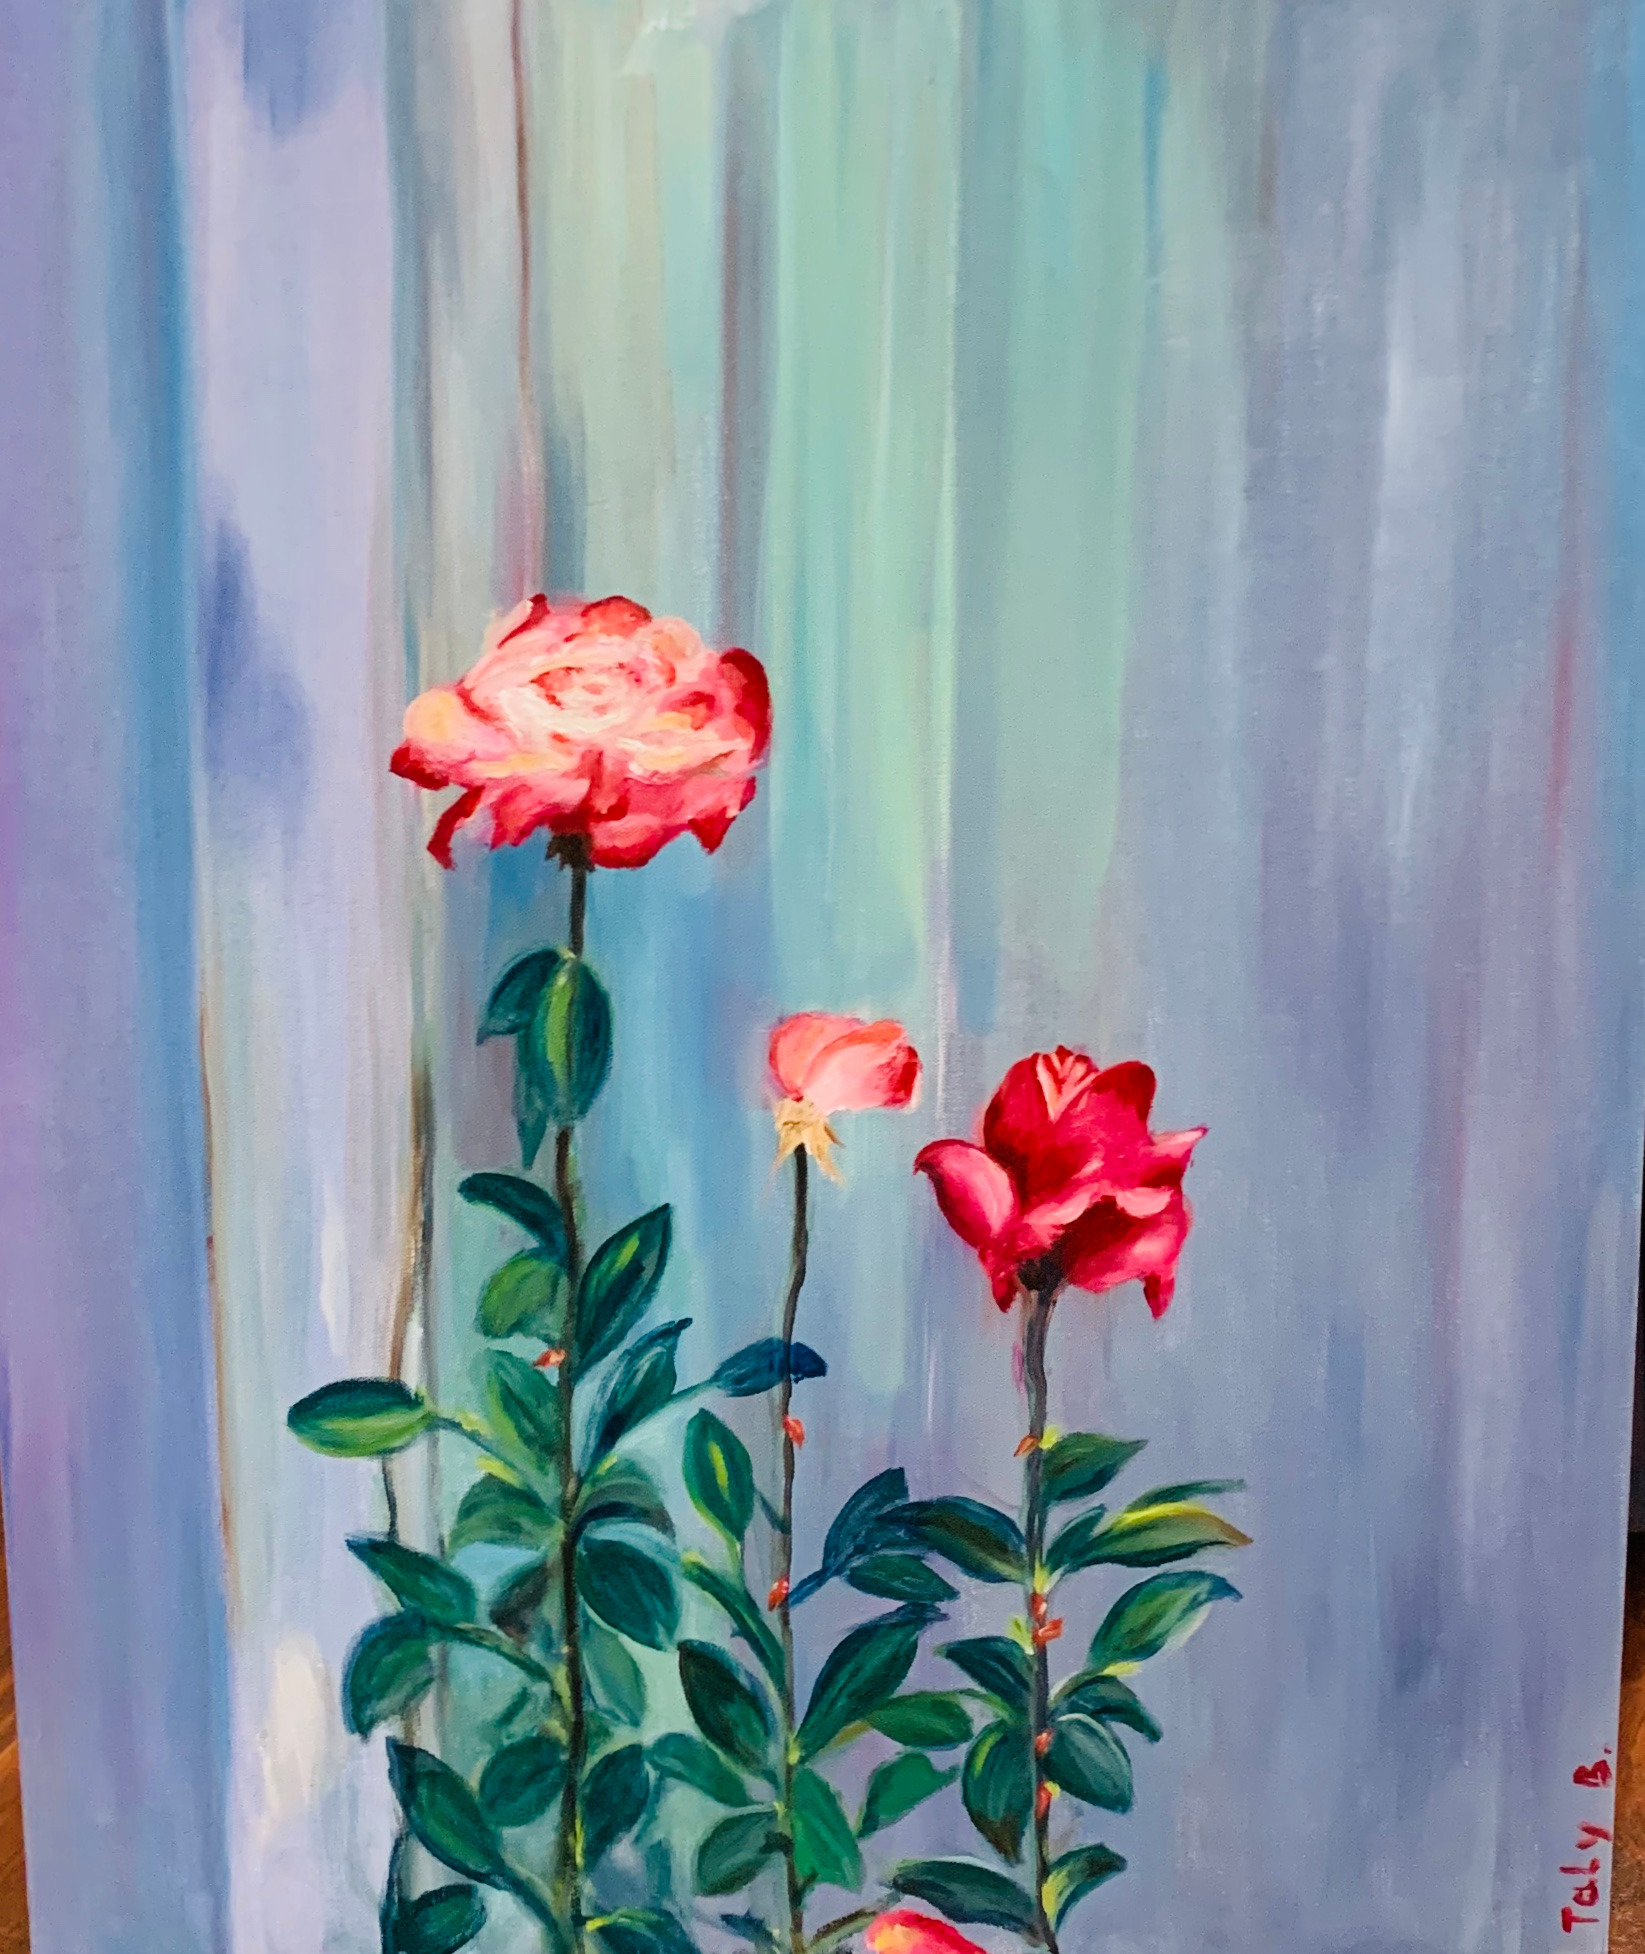 Wall of flowers oil 24x30 2400 q1xiwi